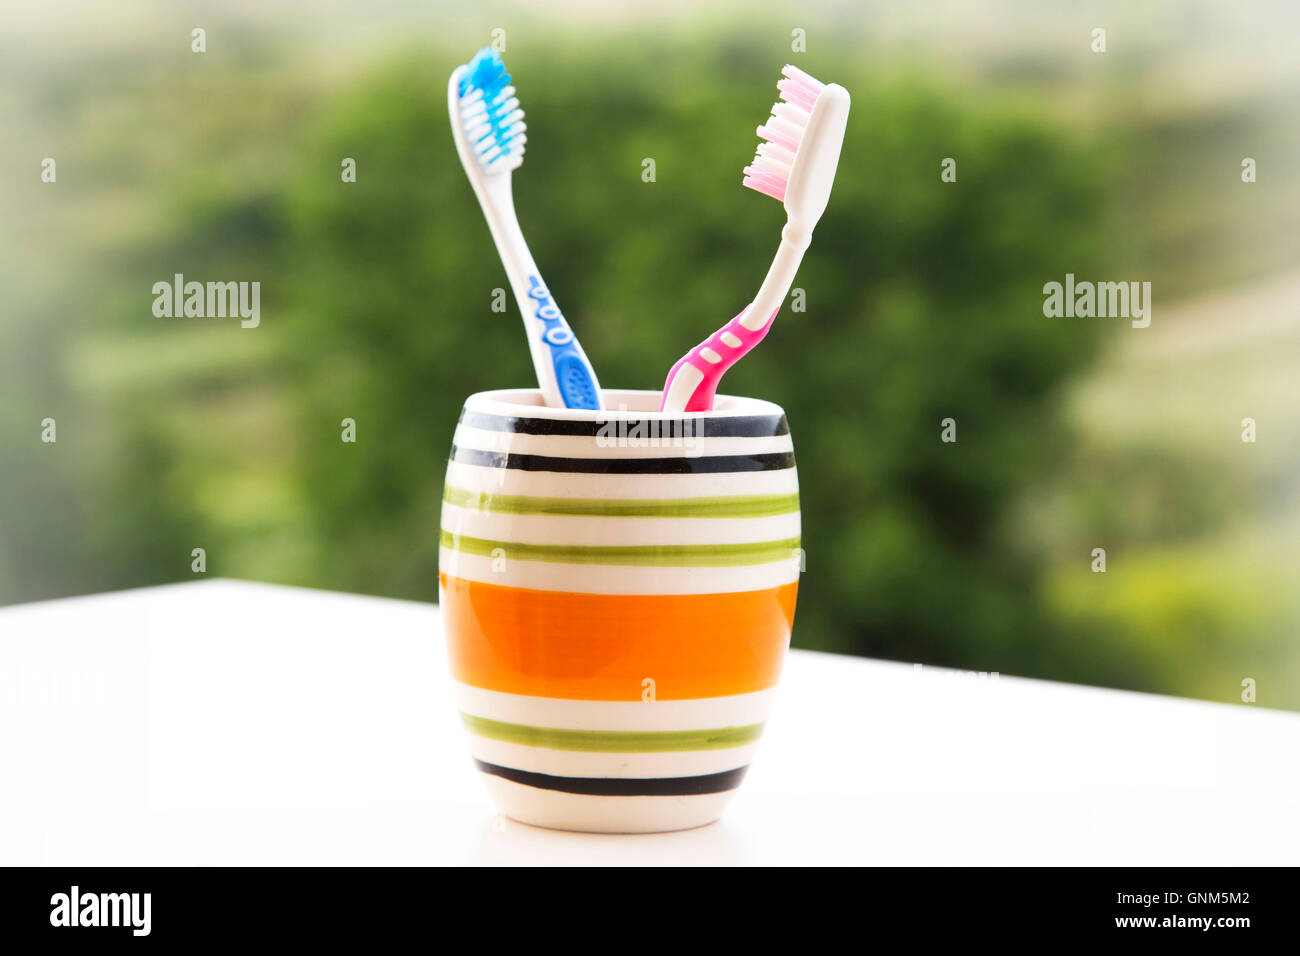 Tooth brushes in glass, his and hers Stock Photo